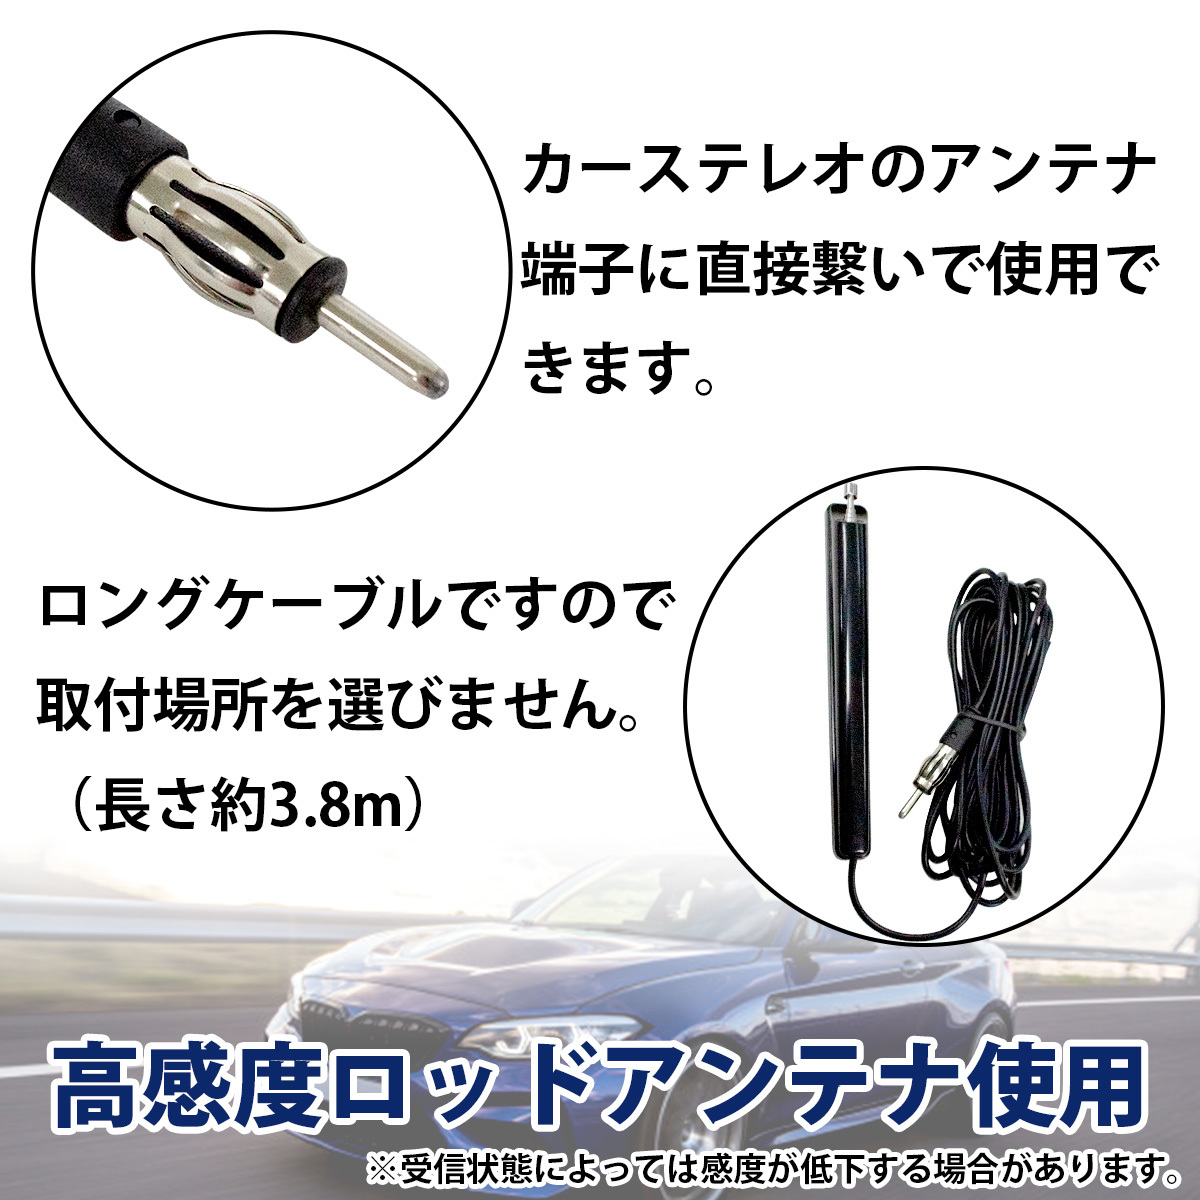  car radio antenna high sensitive AM FM all-purpose booster DIN terminal both sides tape code 3.8m cable car old car domestic production car foreign automobile truck 